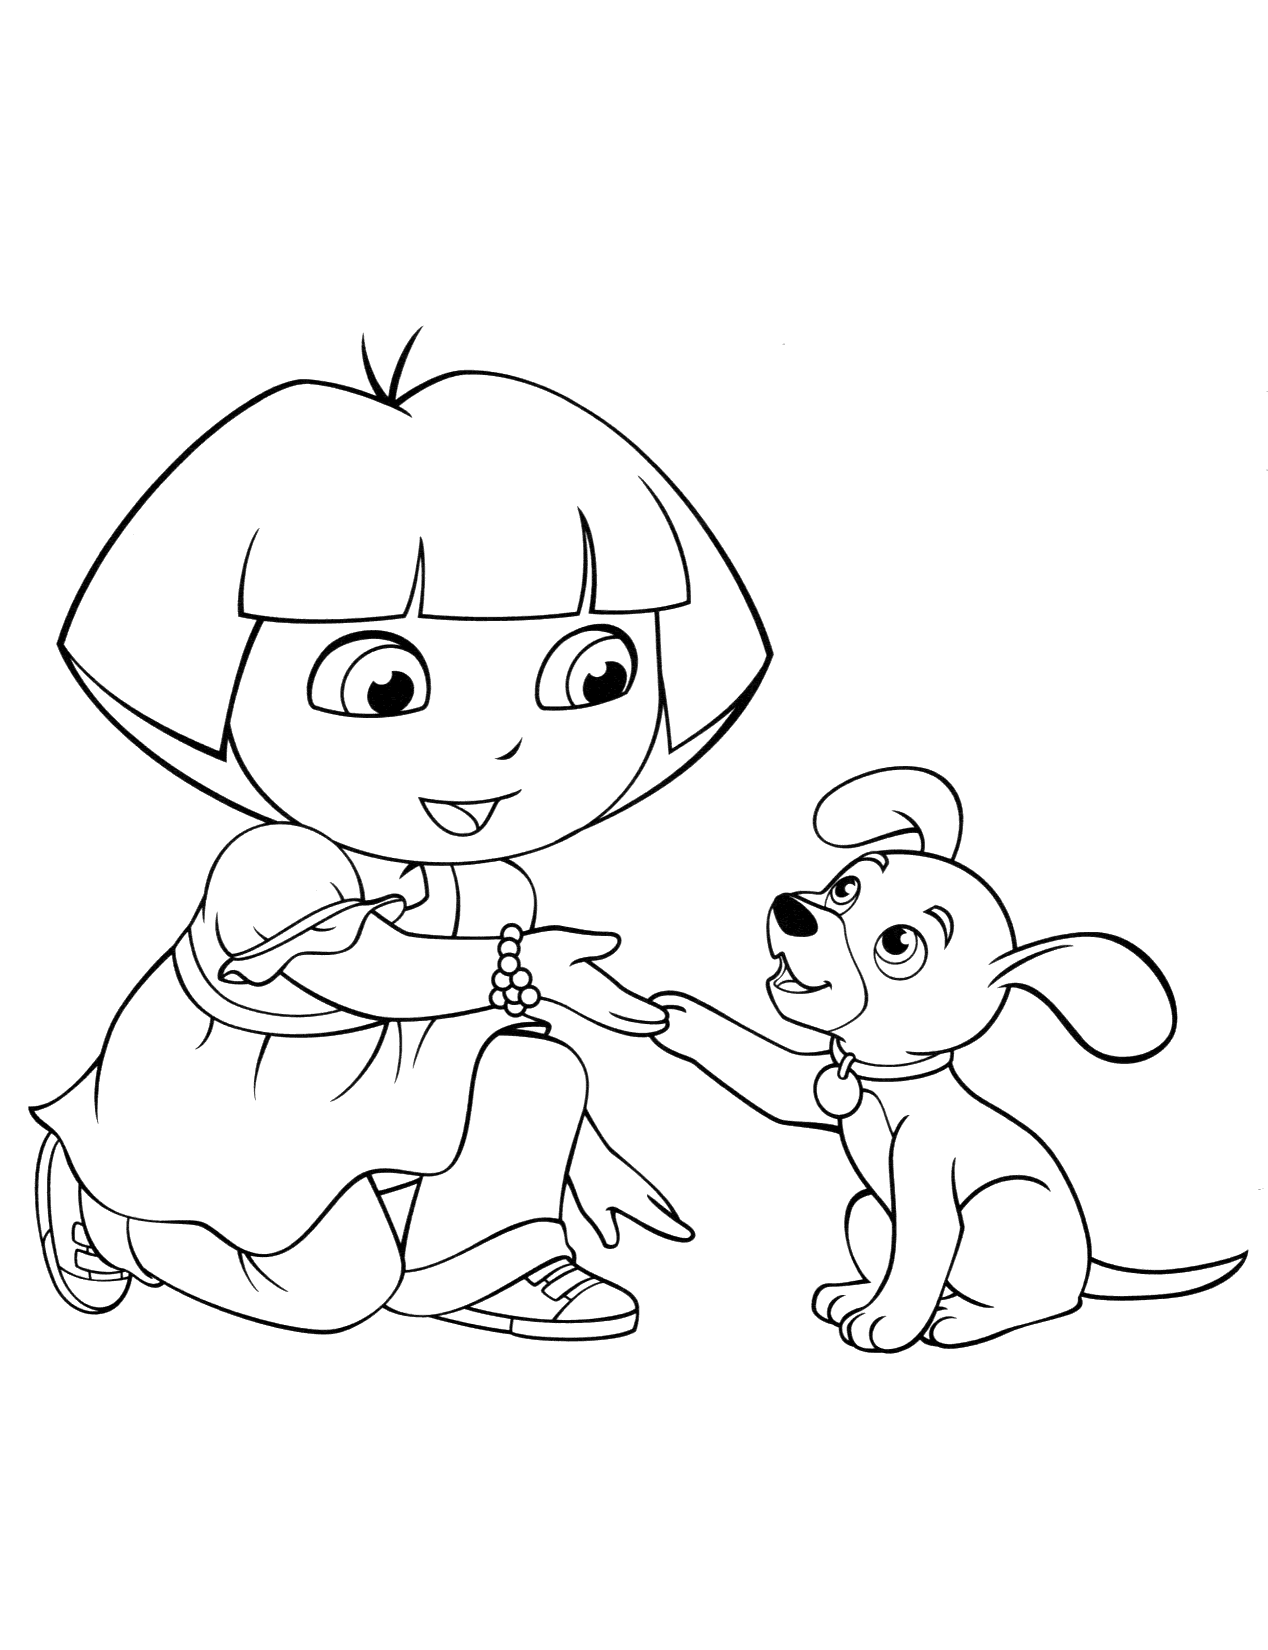 DORA THE EXPLORER coloring pages - Tico the squirrel | Squirrel coloring  page, Nick jr coloring pages, Easter coloring pages